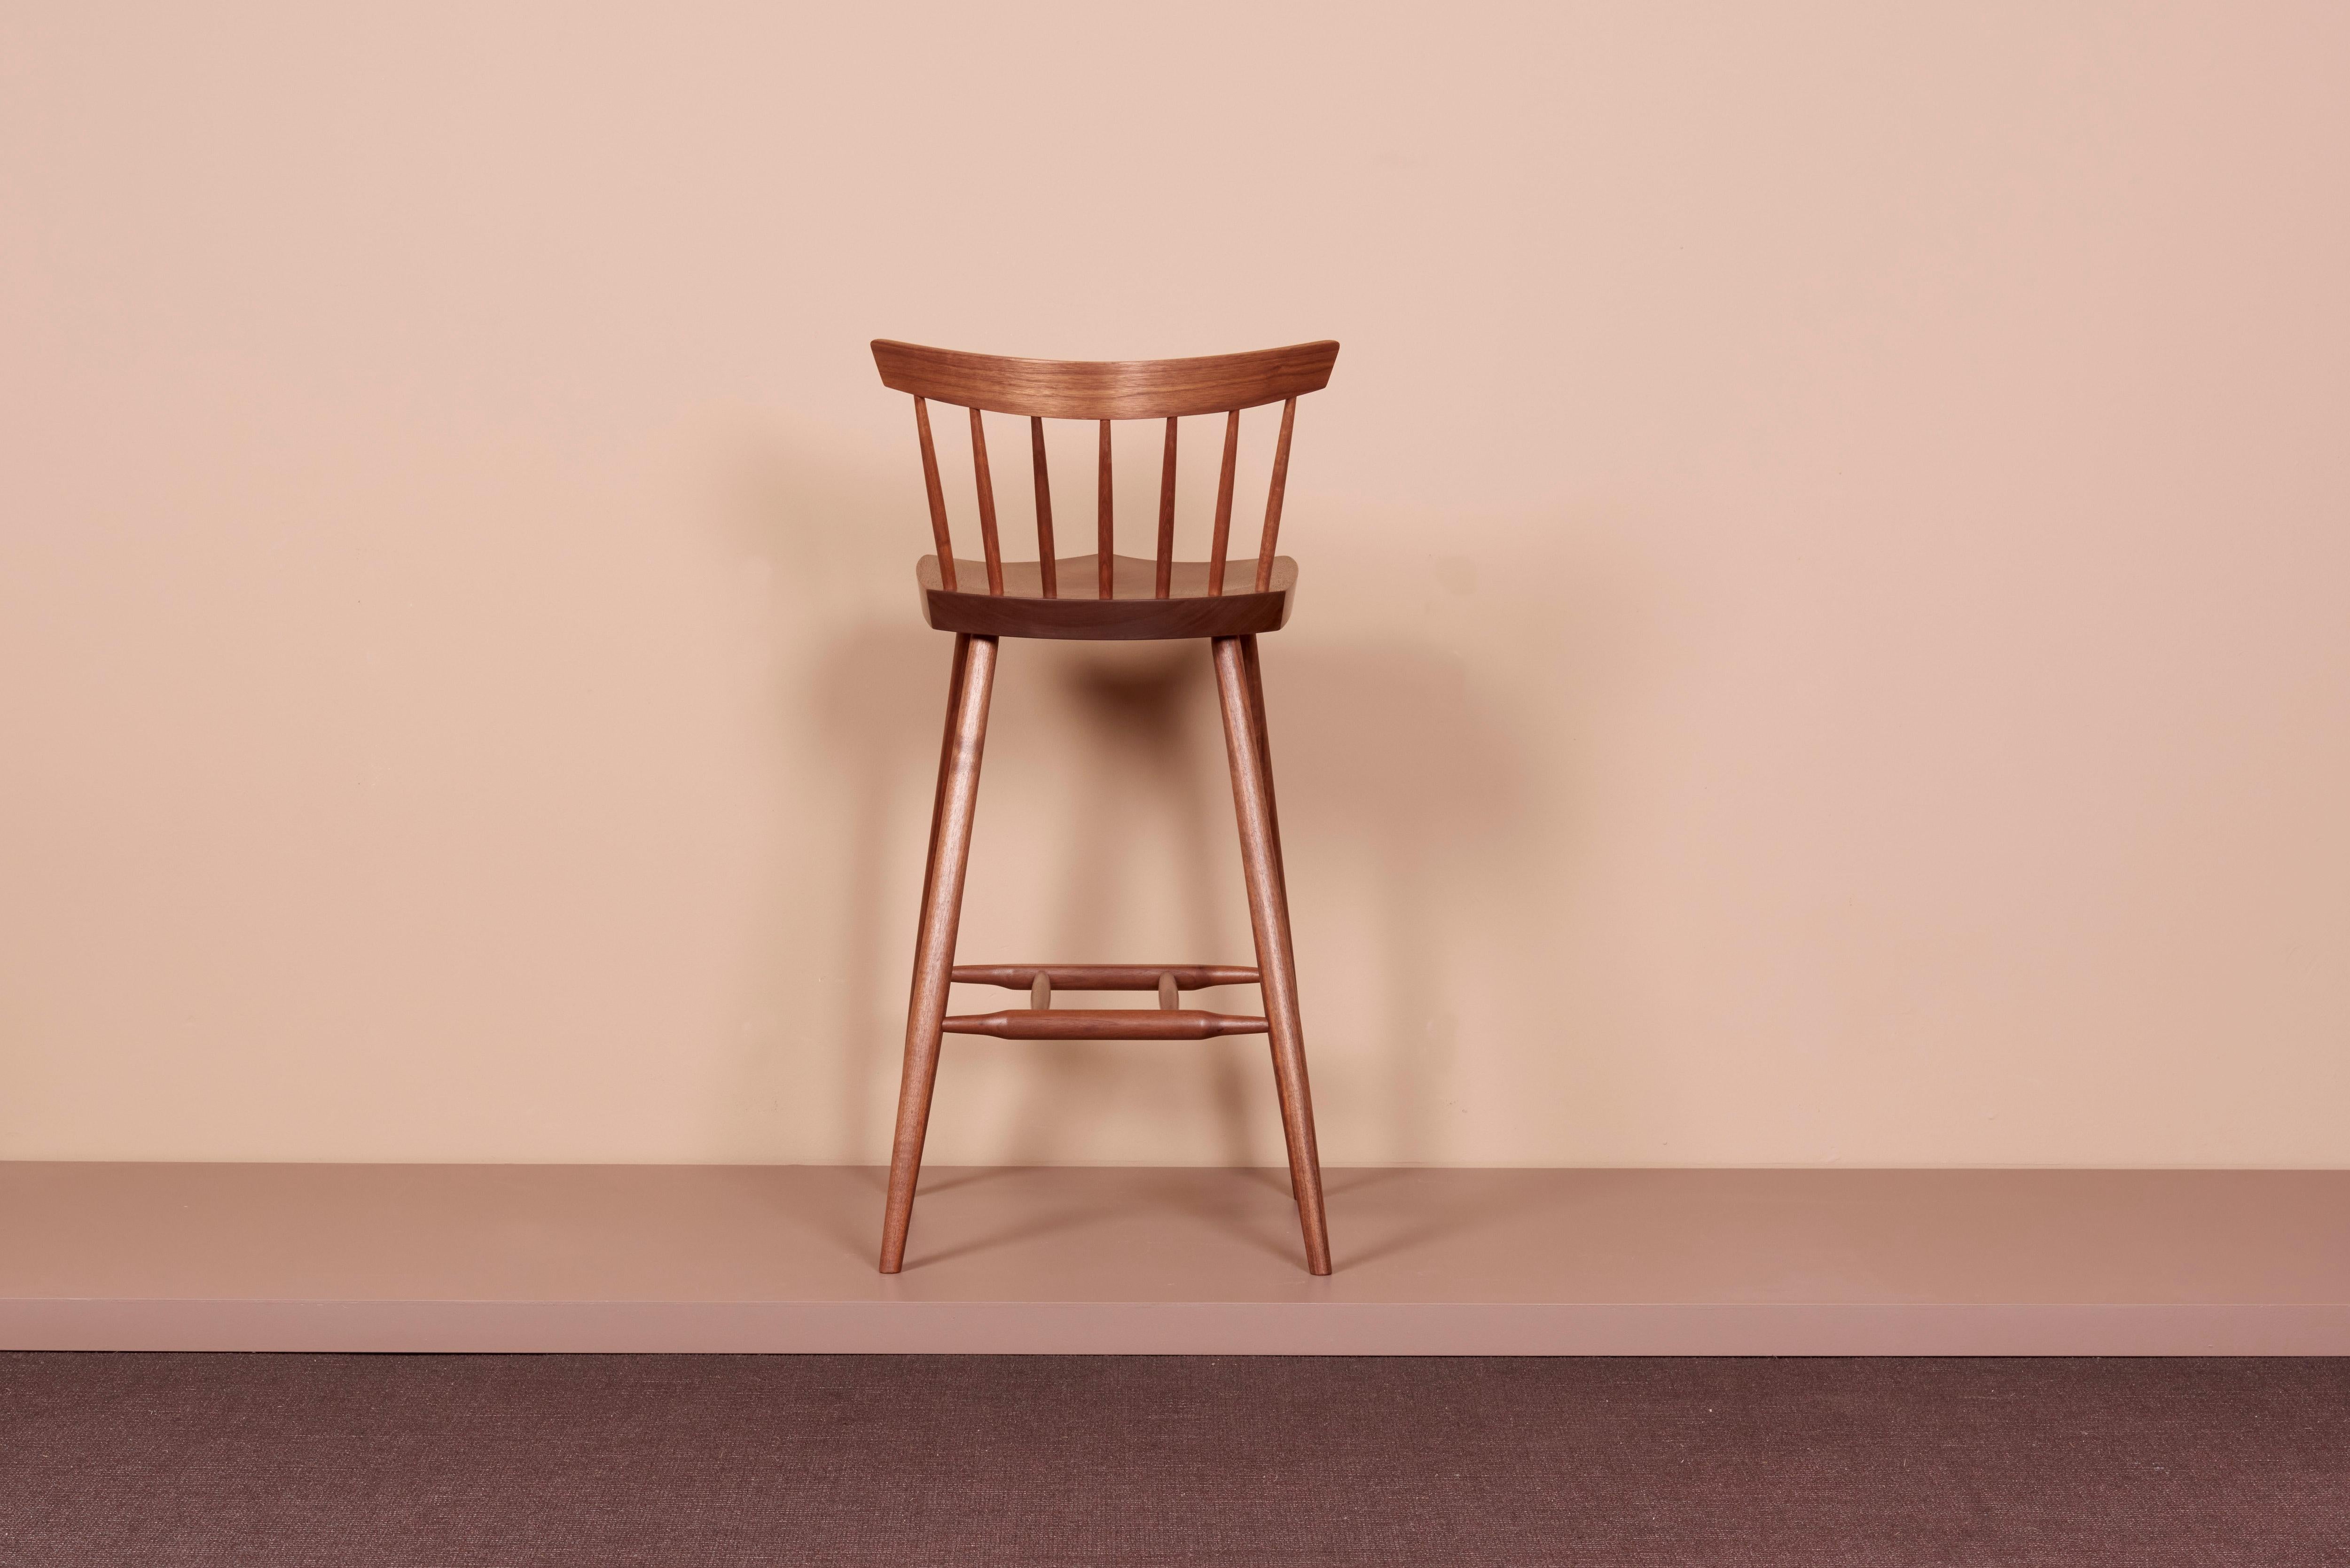 Mira Nakashima 4 legged high chair based on a design by George Nakashima, new. One of the chairs is in stock, for more chairs: Please consider the production lead time of about 18 months.
 